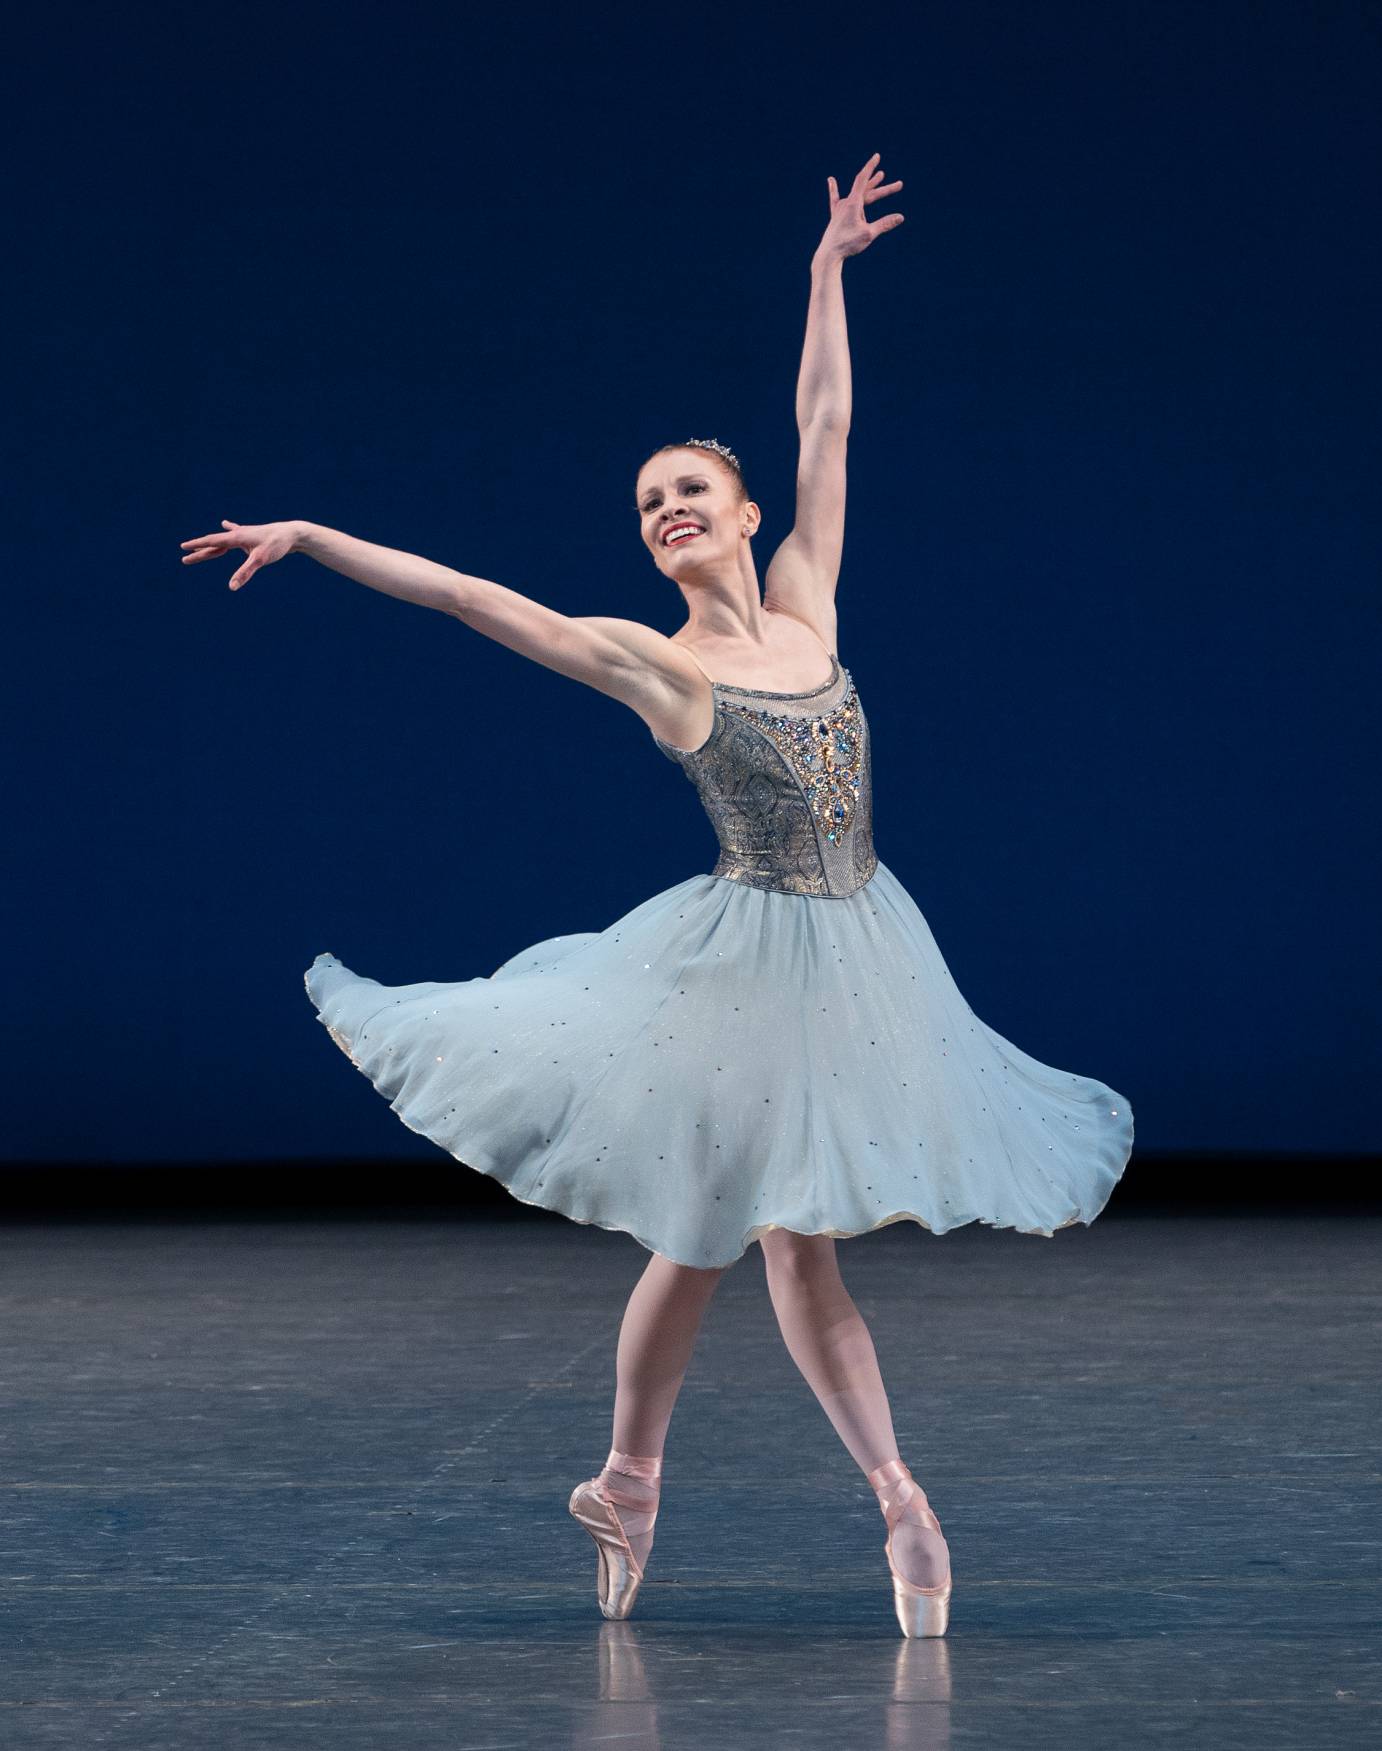 A woman poses en pointe with her legs crossed, her arms amplified